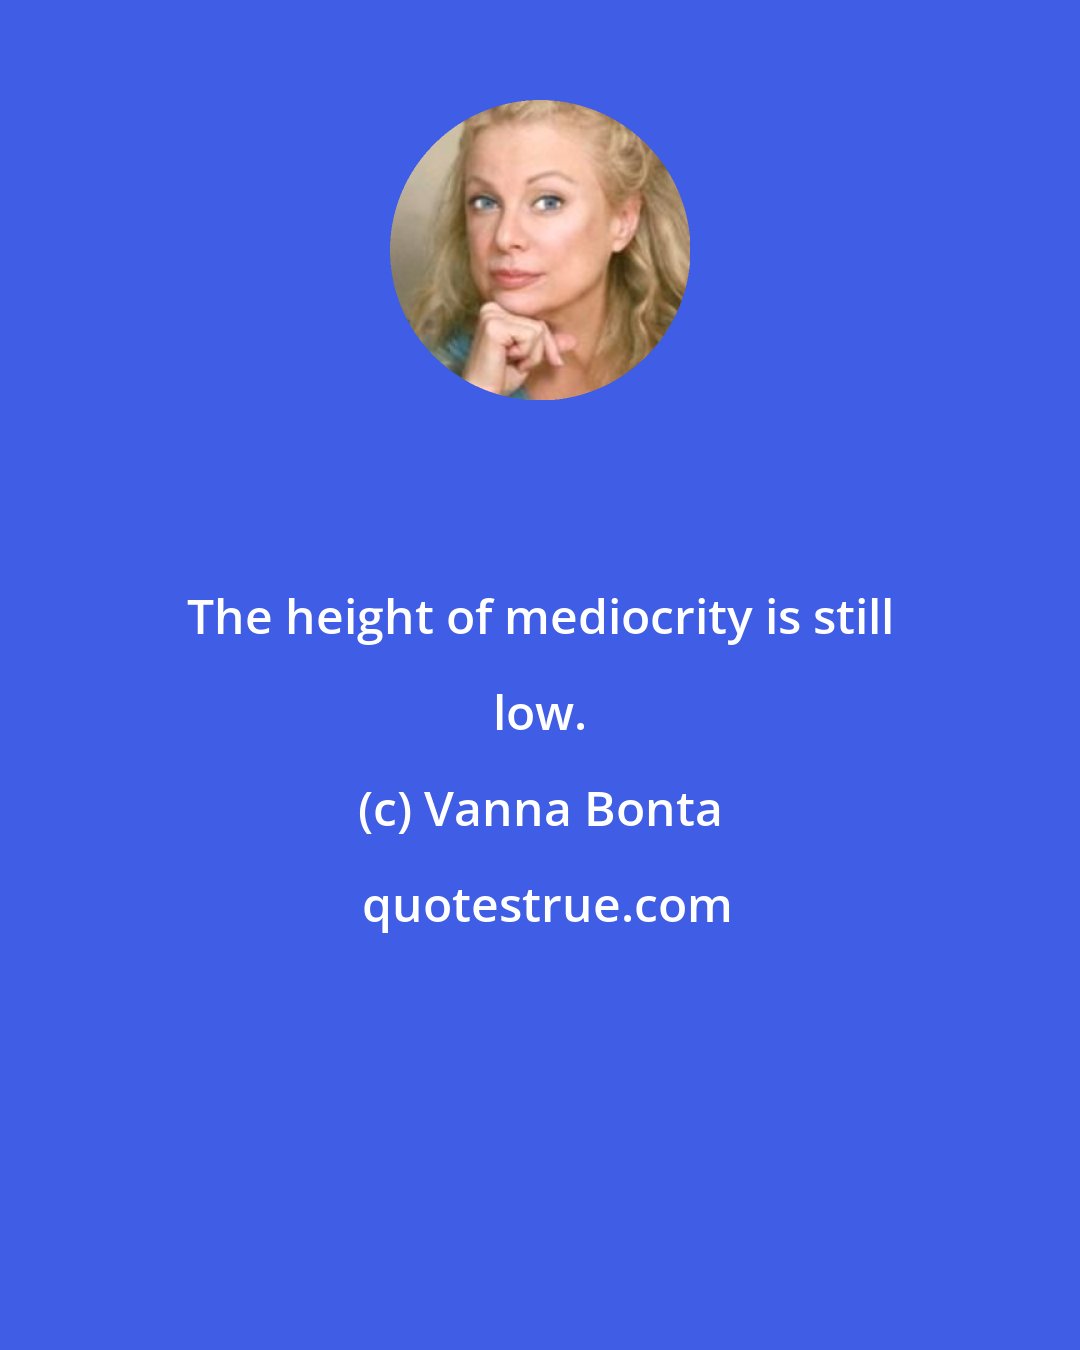 Vanna Bonta: The height of mediocrity is still low.